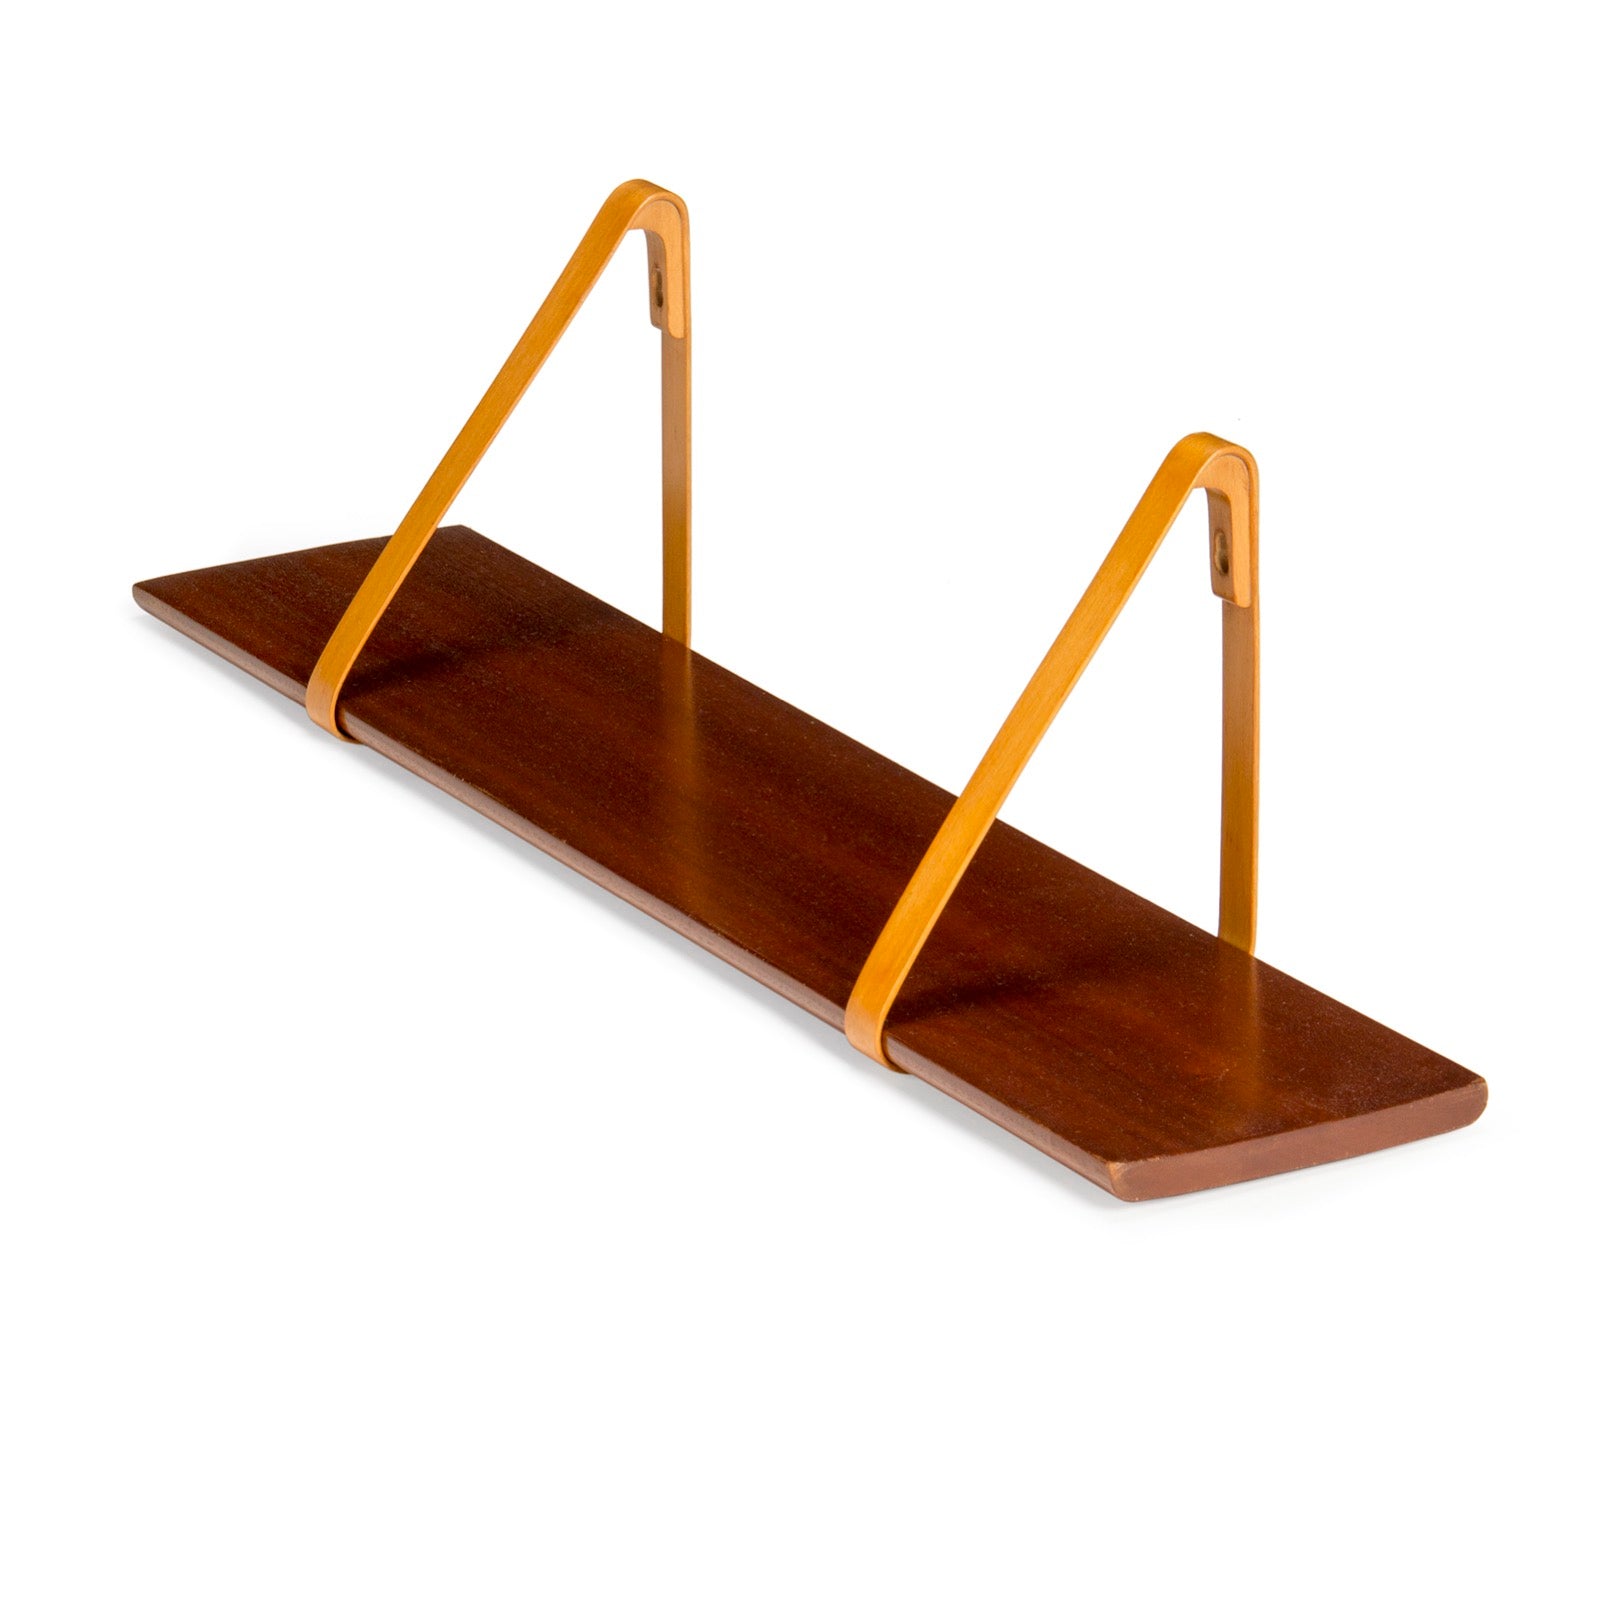 Wood Band Shelf by Kristian S. Vedel for Christiansen, 1949